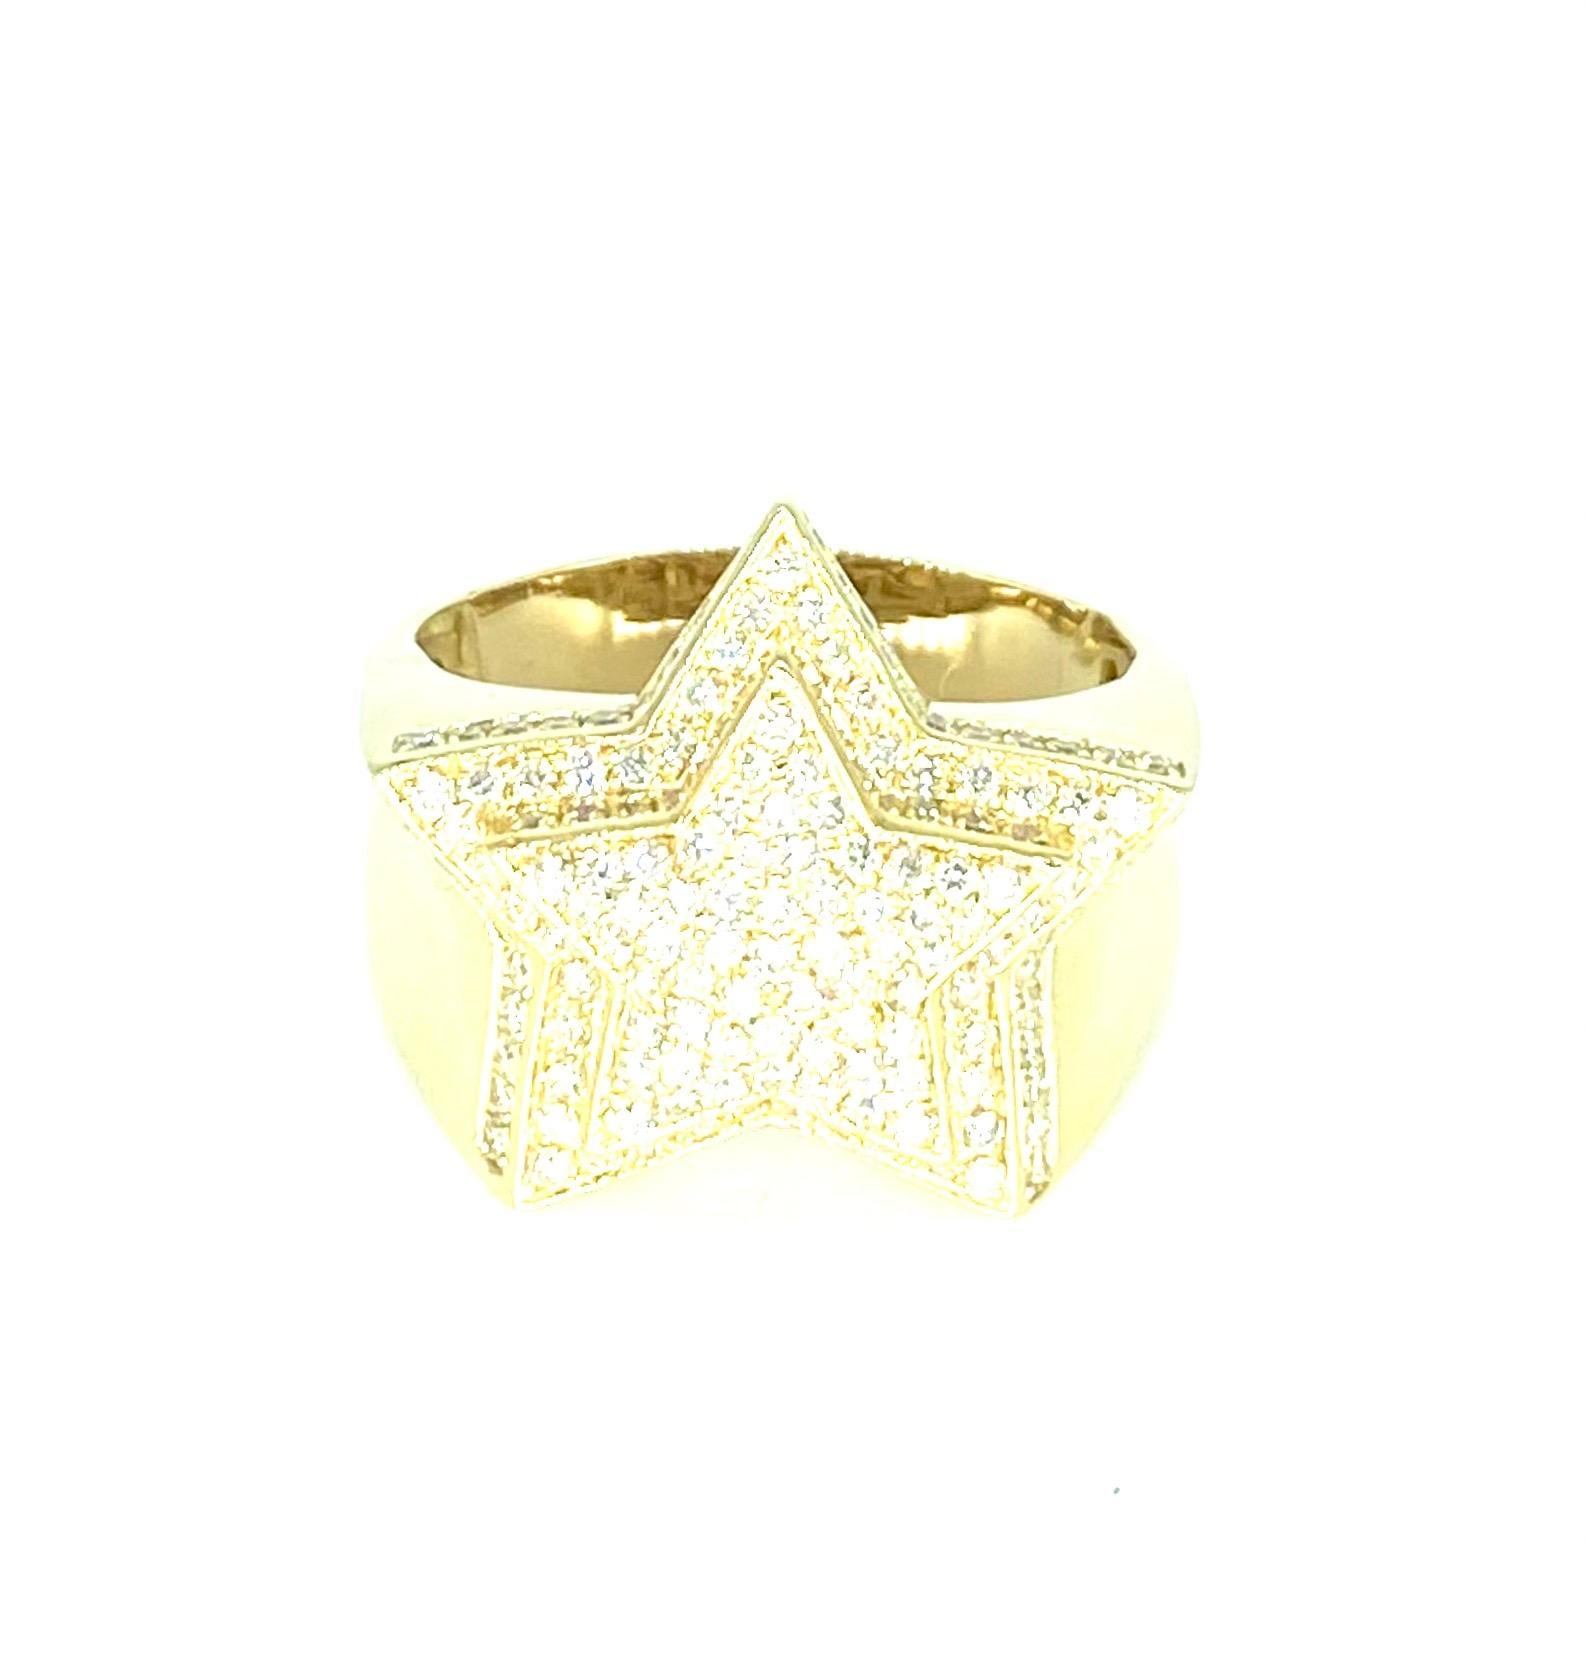 3.50 Carat VS Diamonds Big Double 3D Star Ring 14k Gold. Superb hand made 3D design 5 point star full of diamonds. The total carat Diamonds is approx 3.50 and is hand crafted in 14k solid gold. The ring weights approx 12.2 grams and is a size 13.